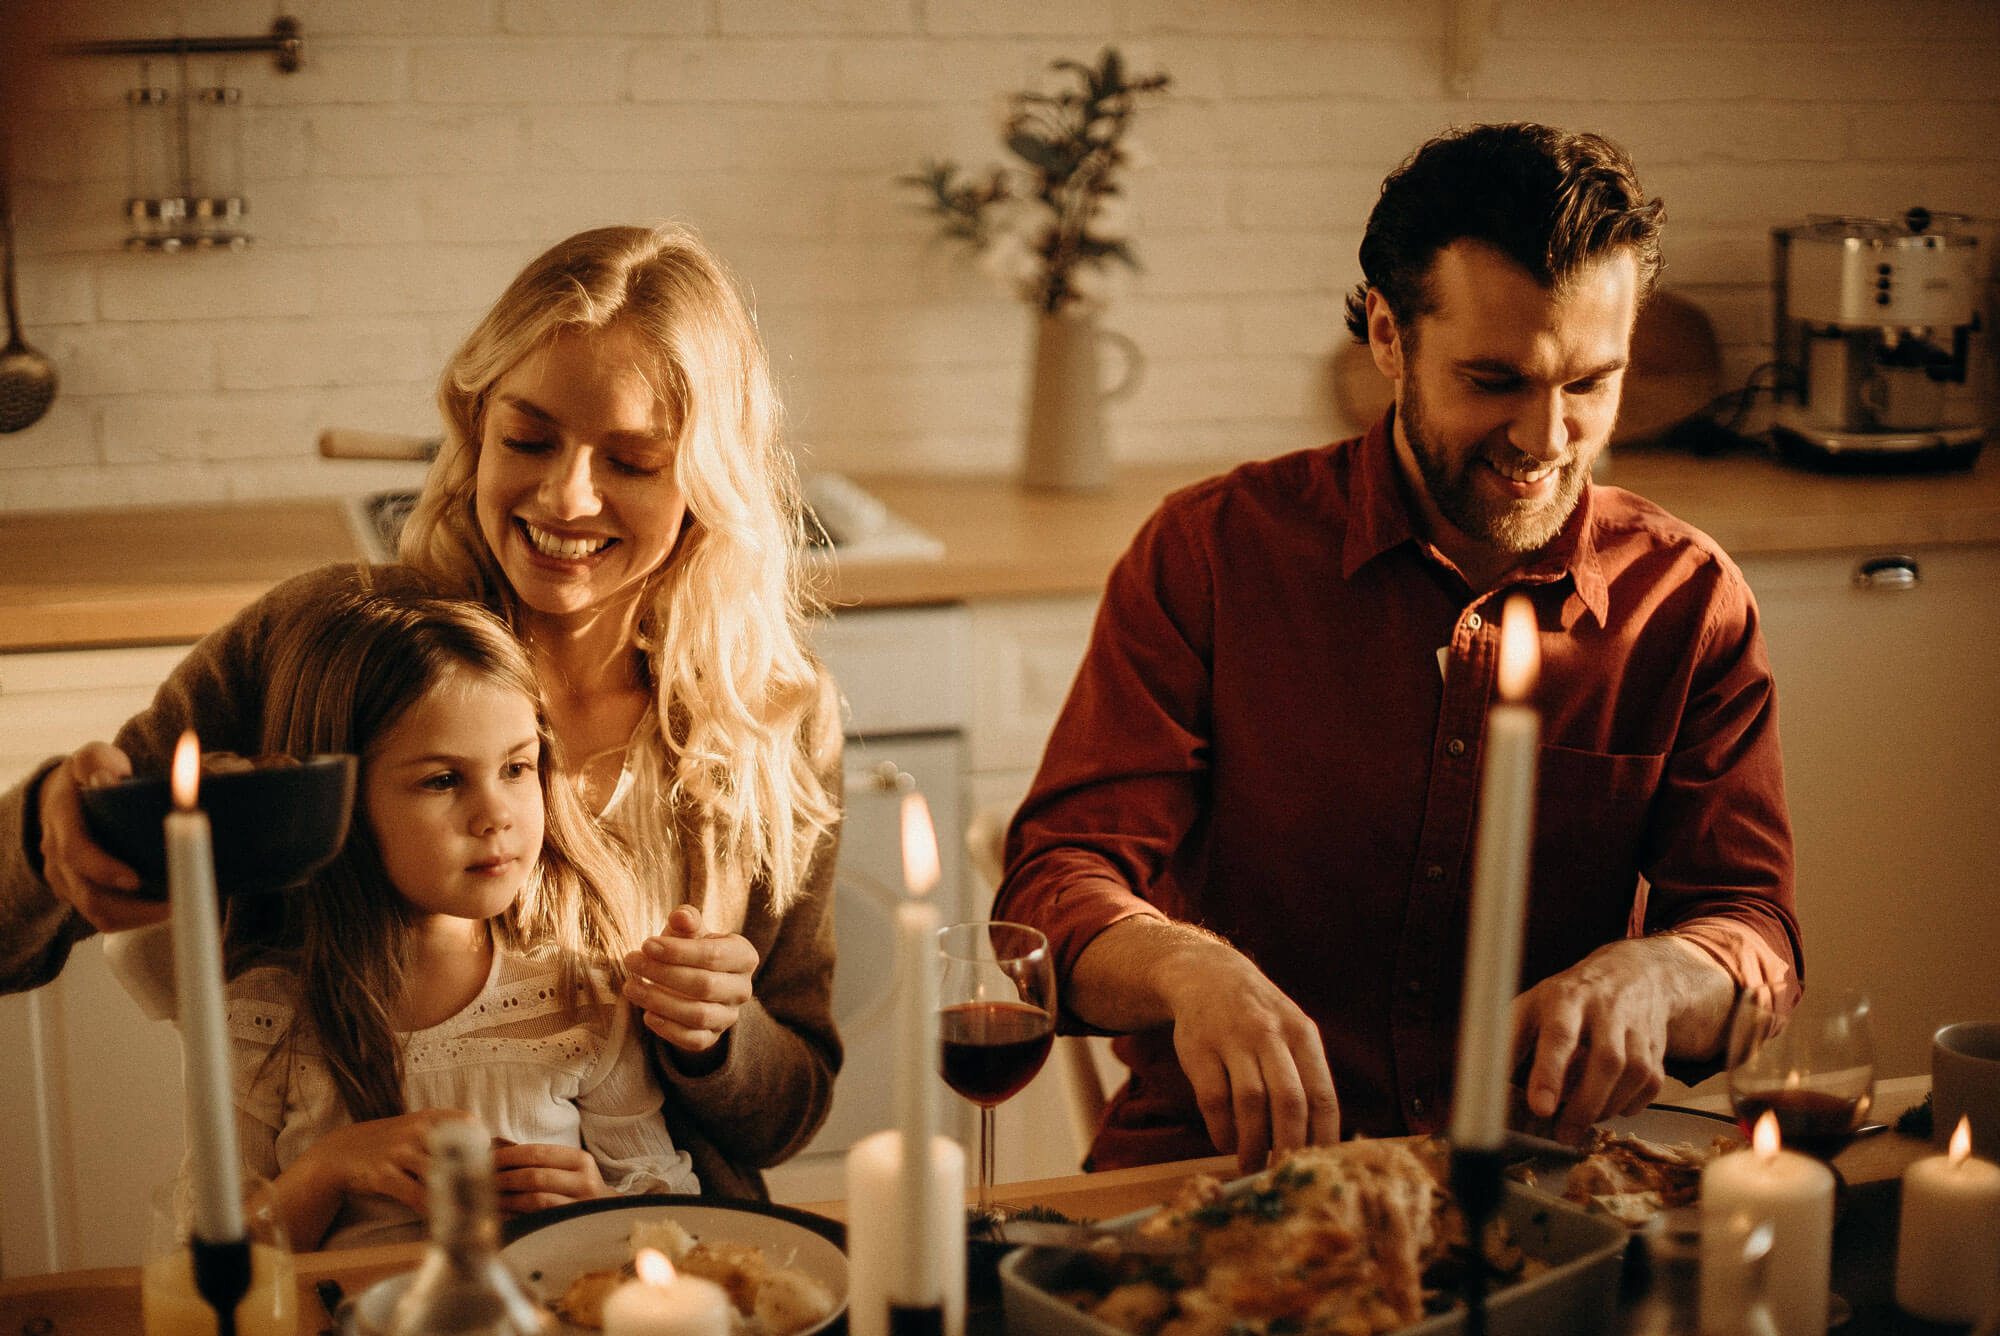 A family sitting at a table enjoying a holiday meal. There are candles lit on the table. A man and woman are smiling and a little girl is looking at the table of food in wonderment.